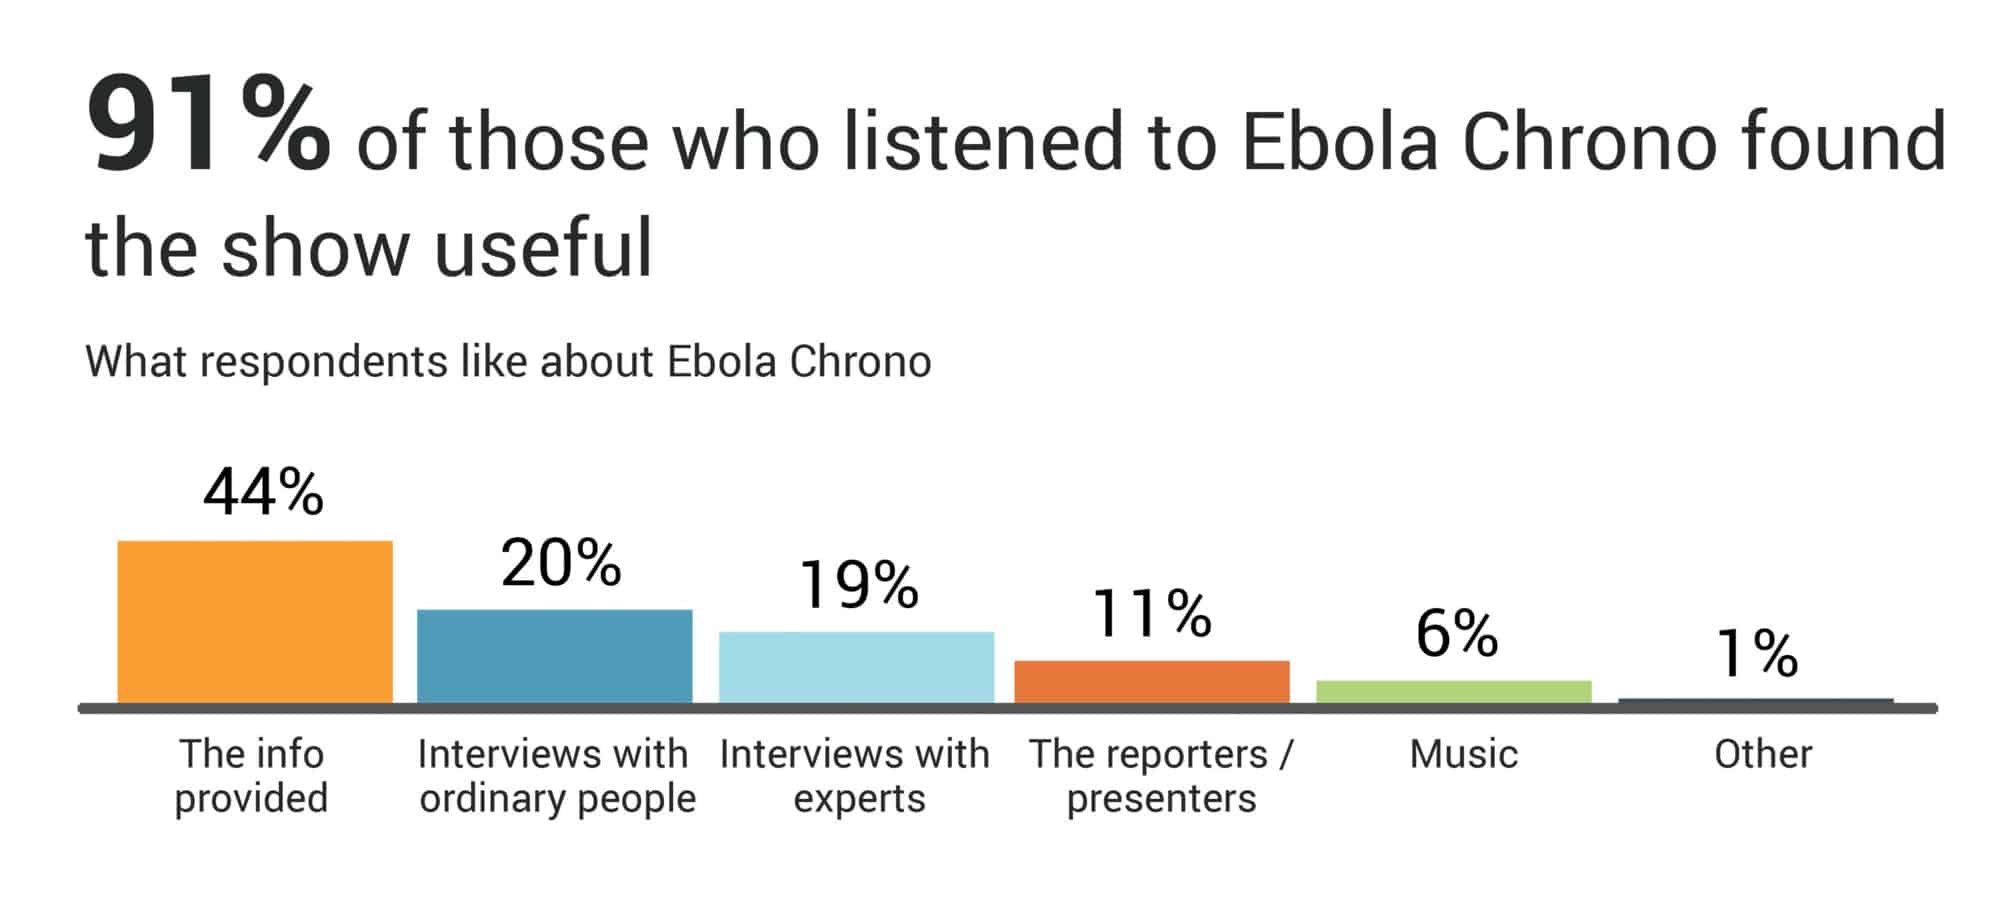 Bar graph showing what respondents like about Ebola Chrono